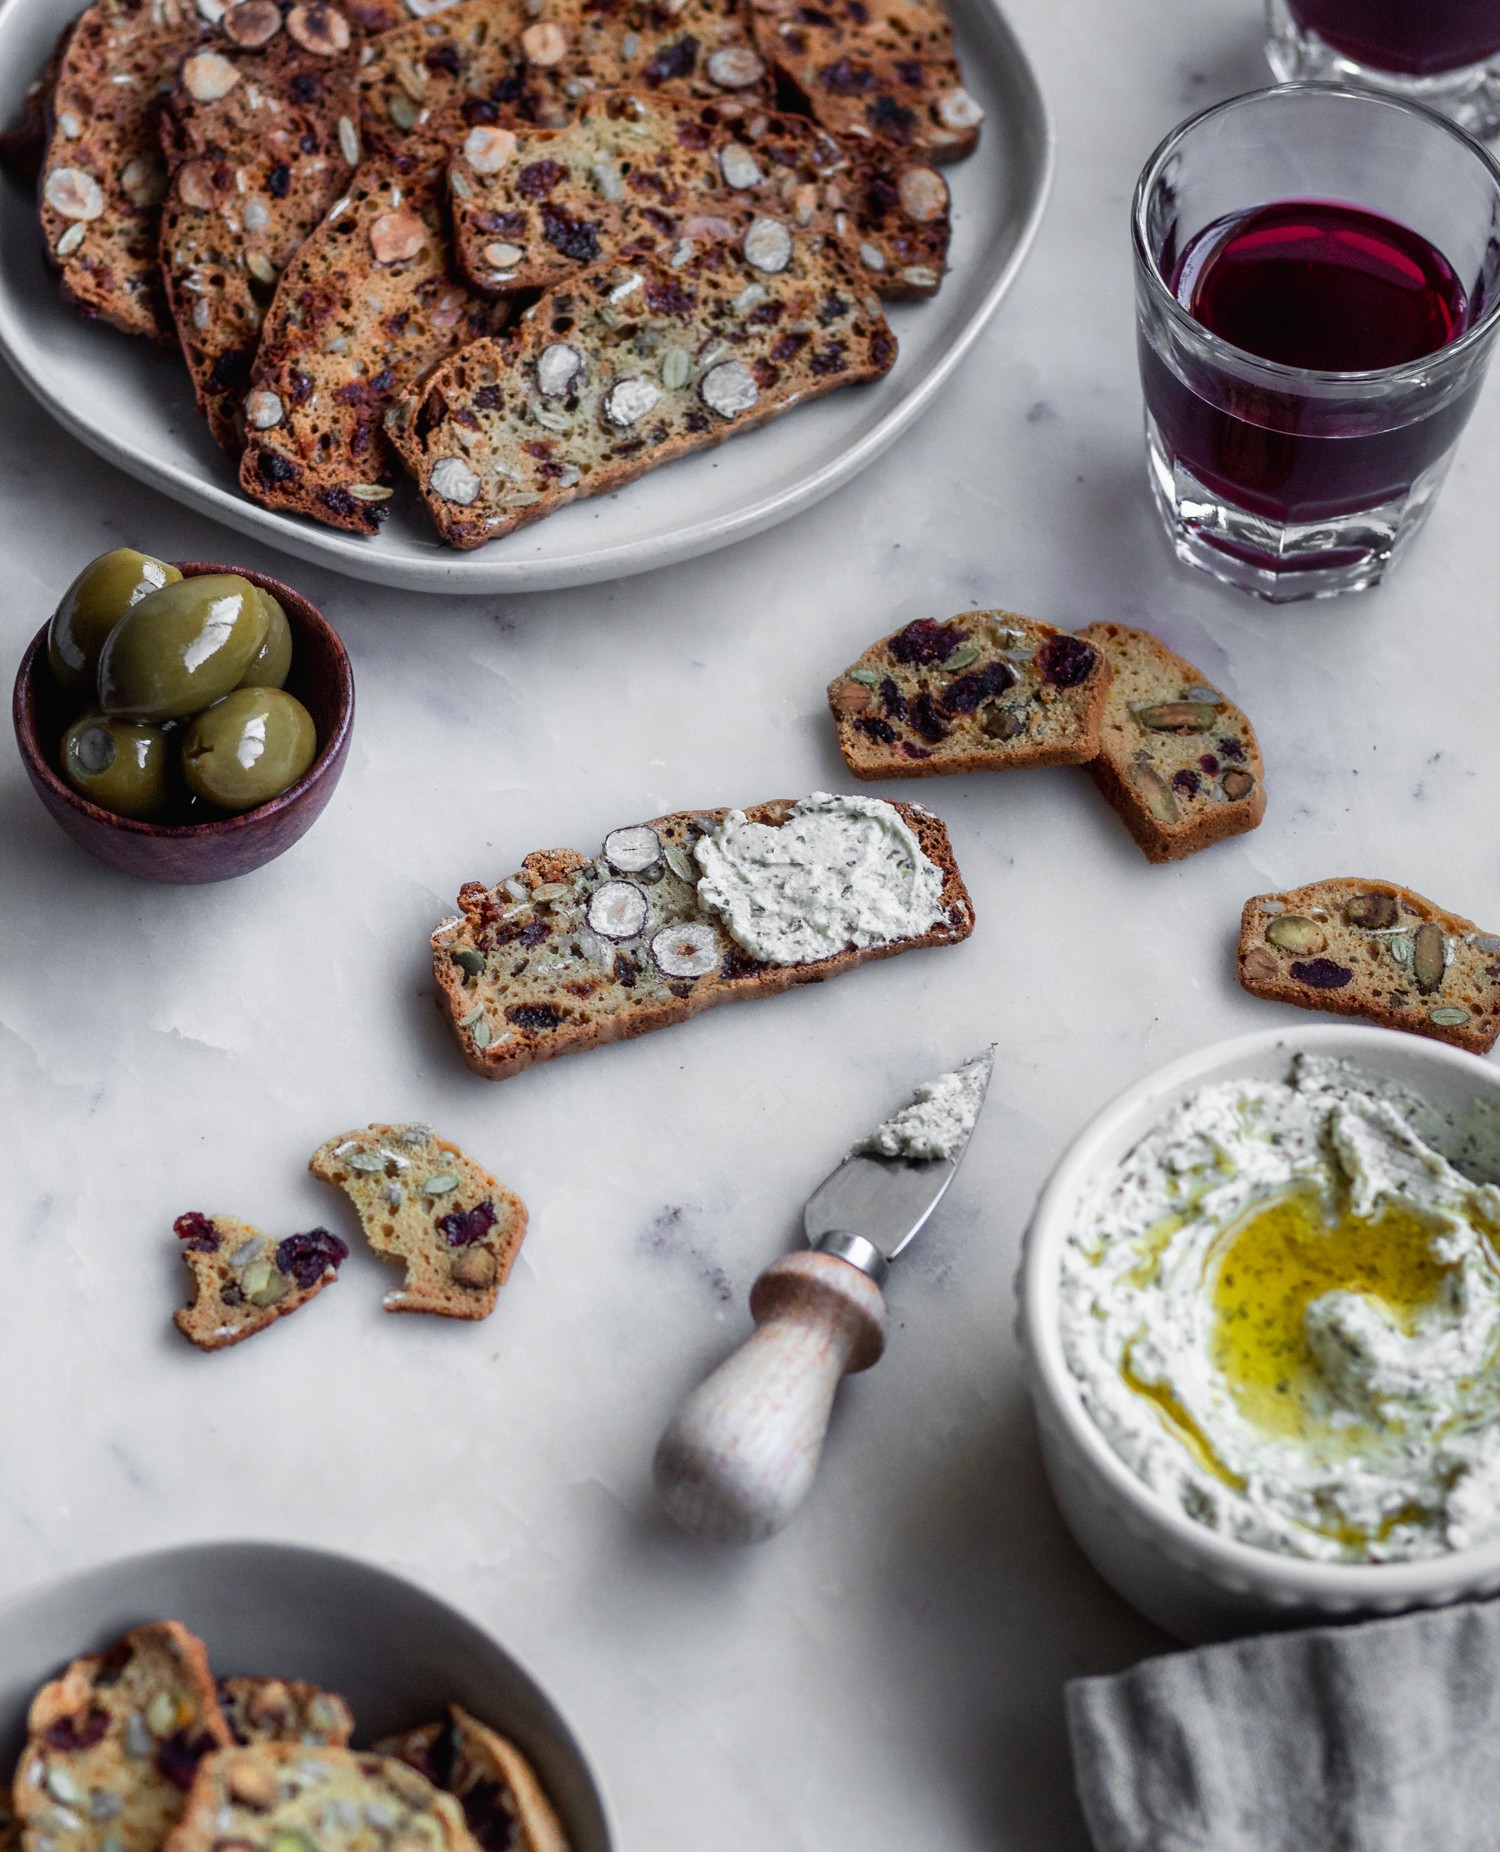 A side image of a homemade fruit and nut crisp on a white marble counter surrounded by more crackers, a bowl of whipped cheese, a white plate of crackers, a glass of red wine, and a wood bowl of olives.